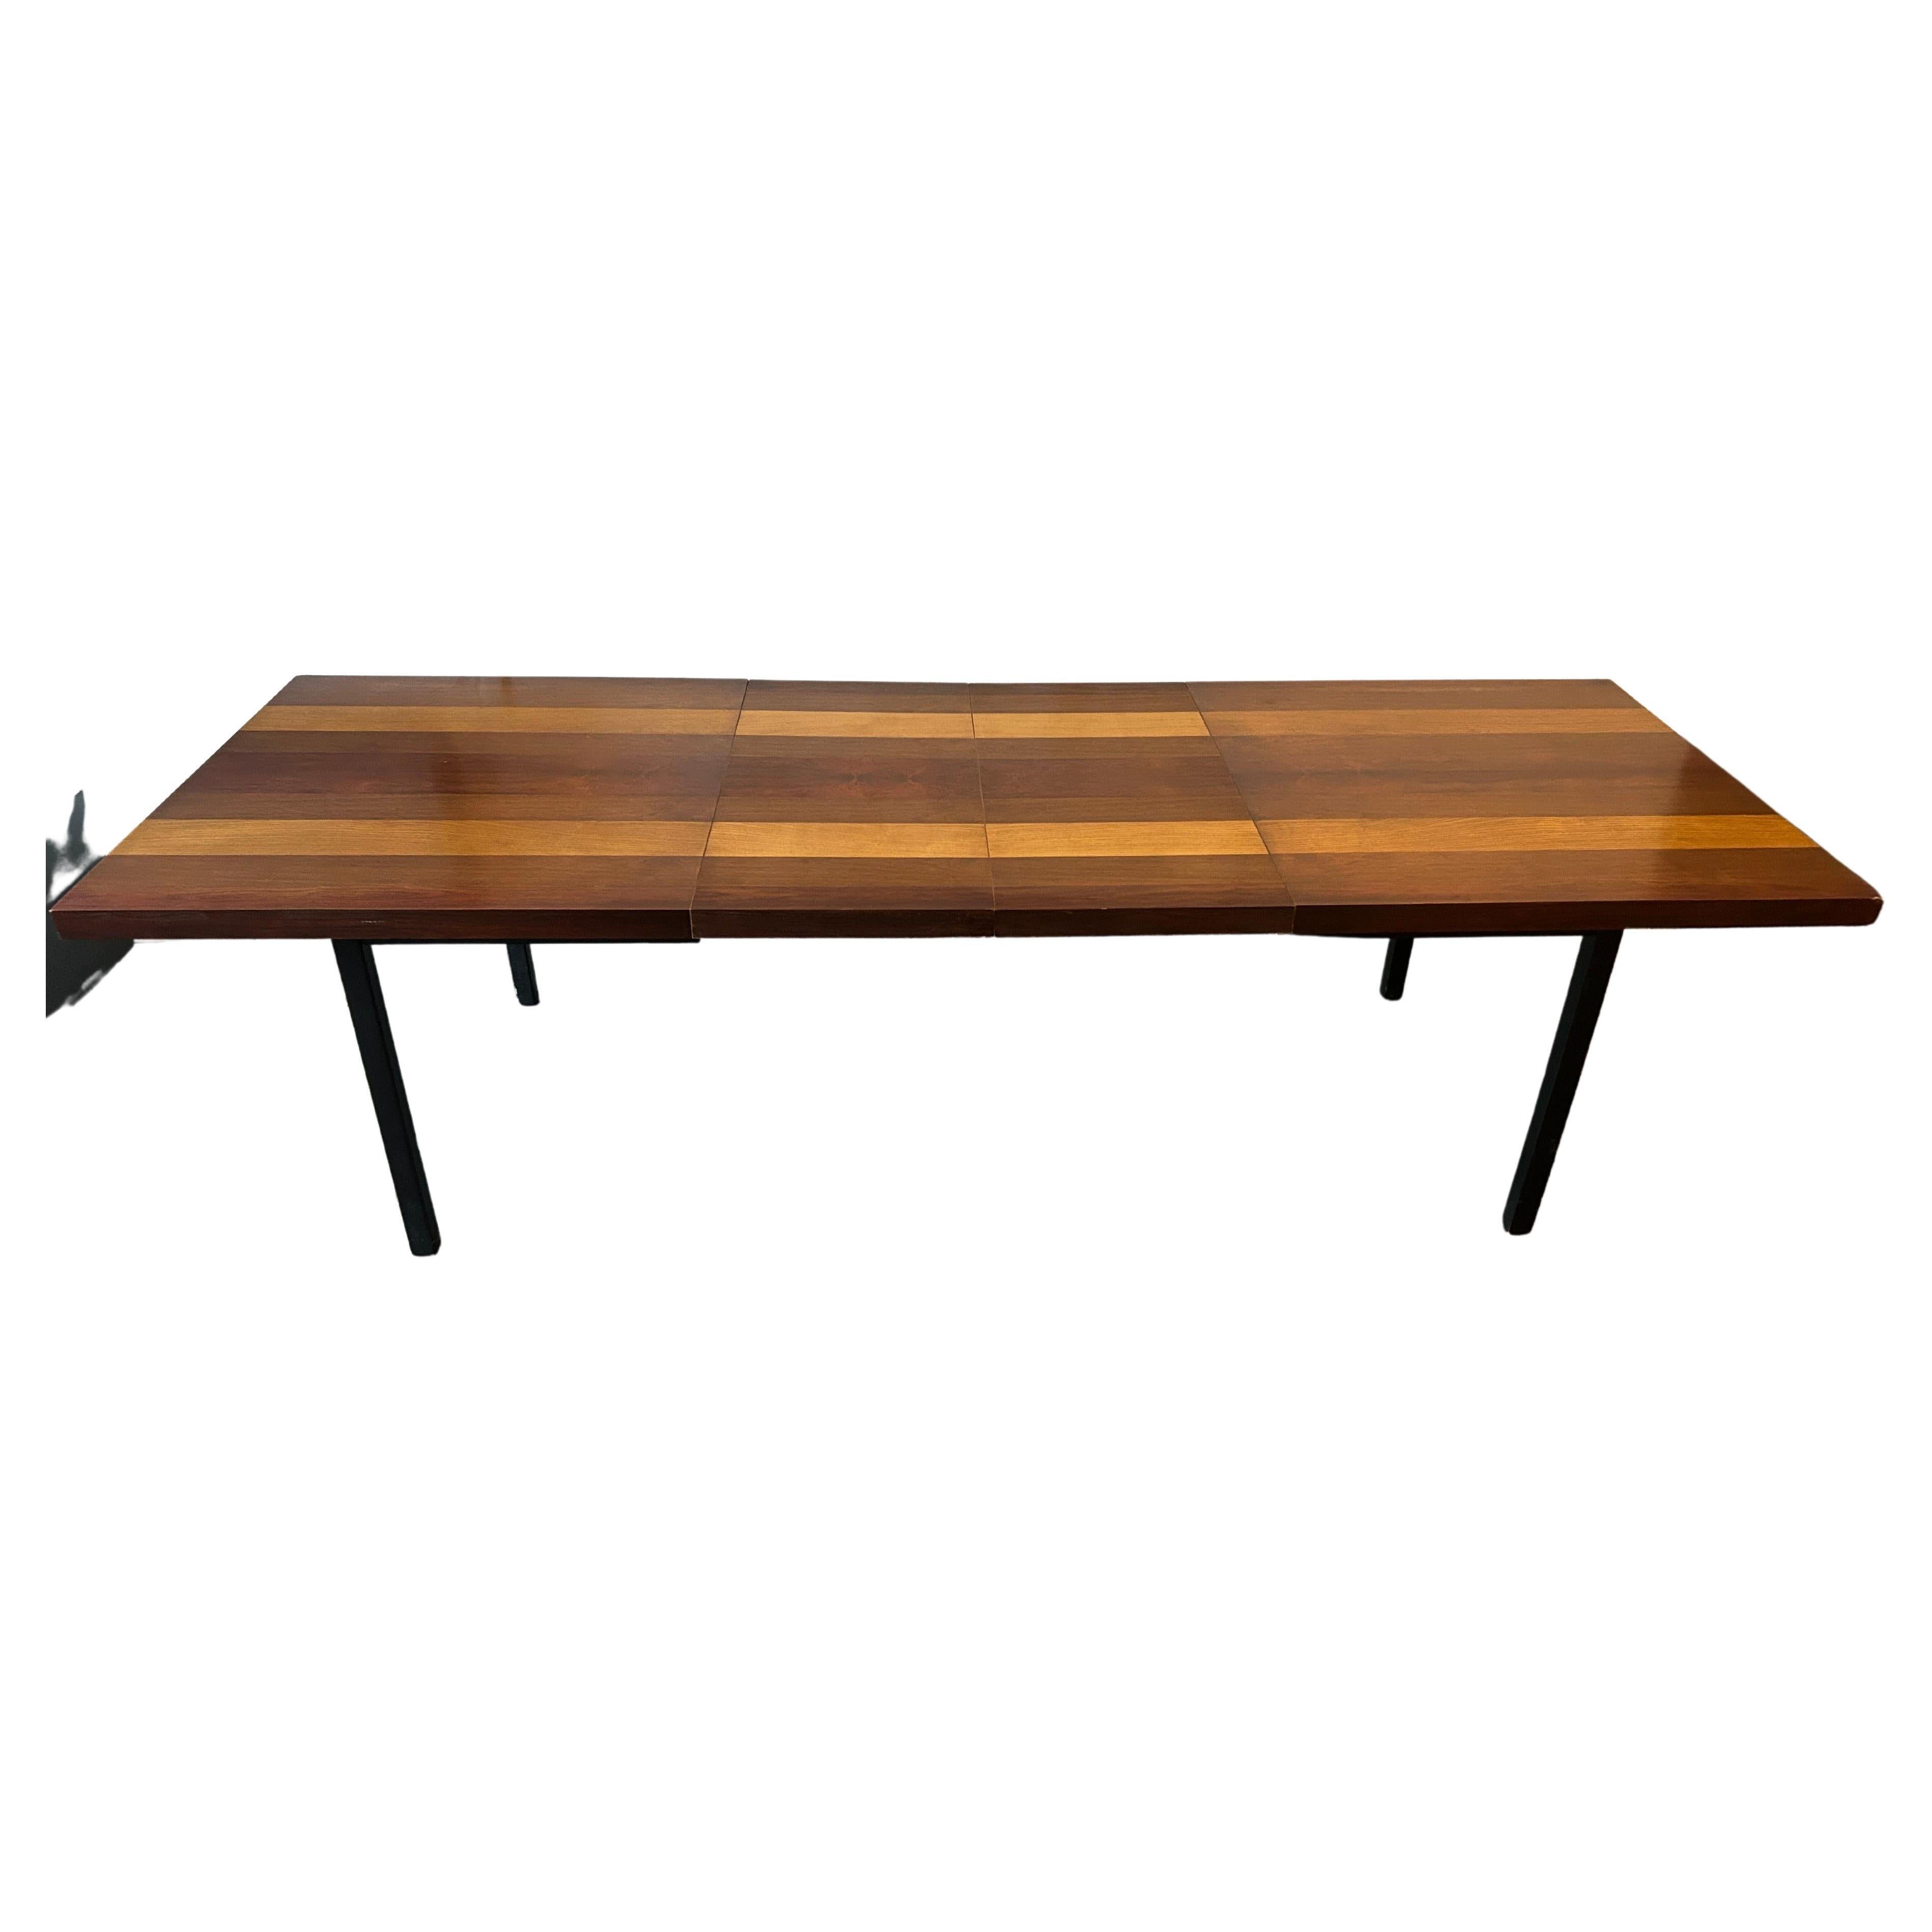 Woodwork Midcentury Expandable Dining Table by Milo Baughman with '2' Leaves